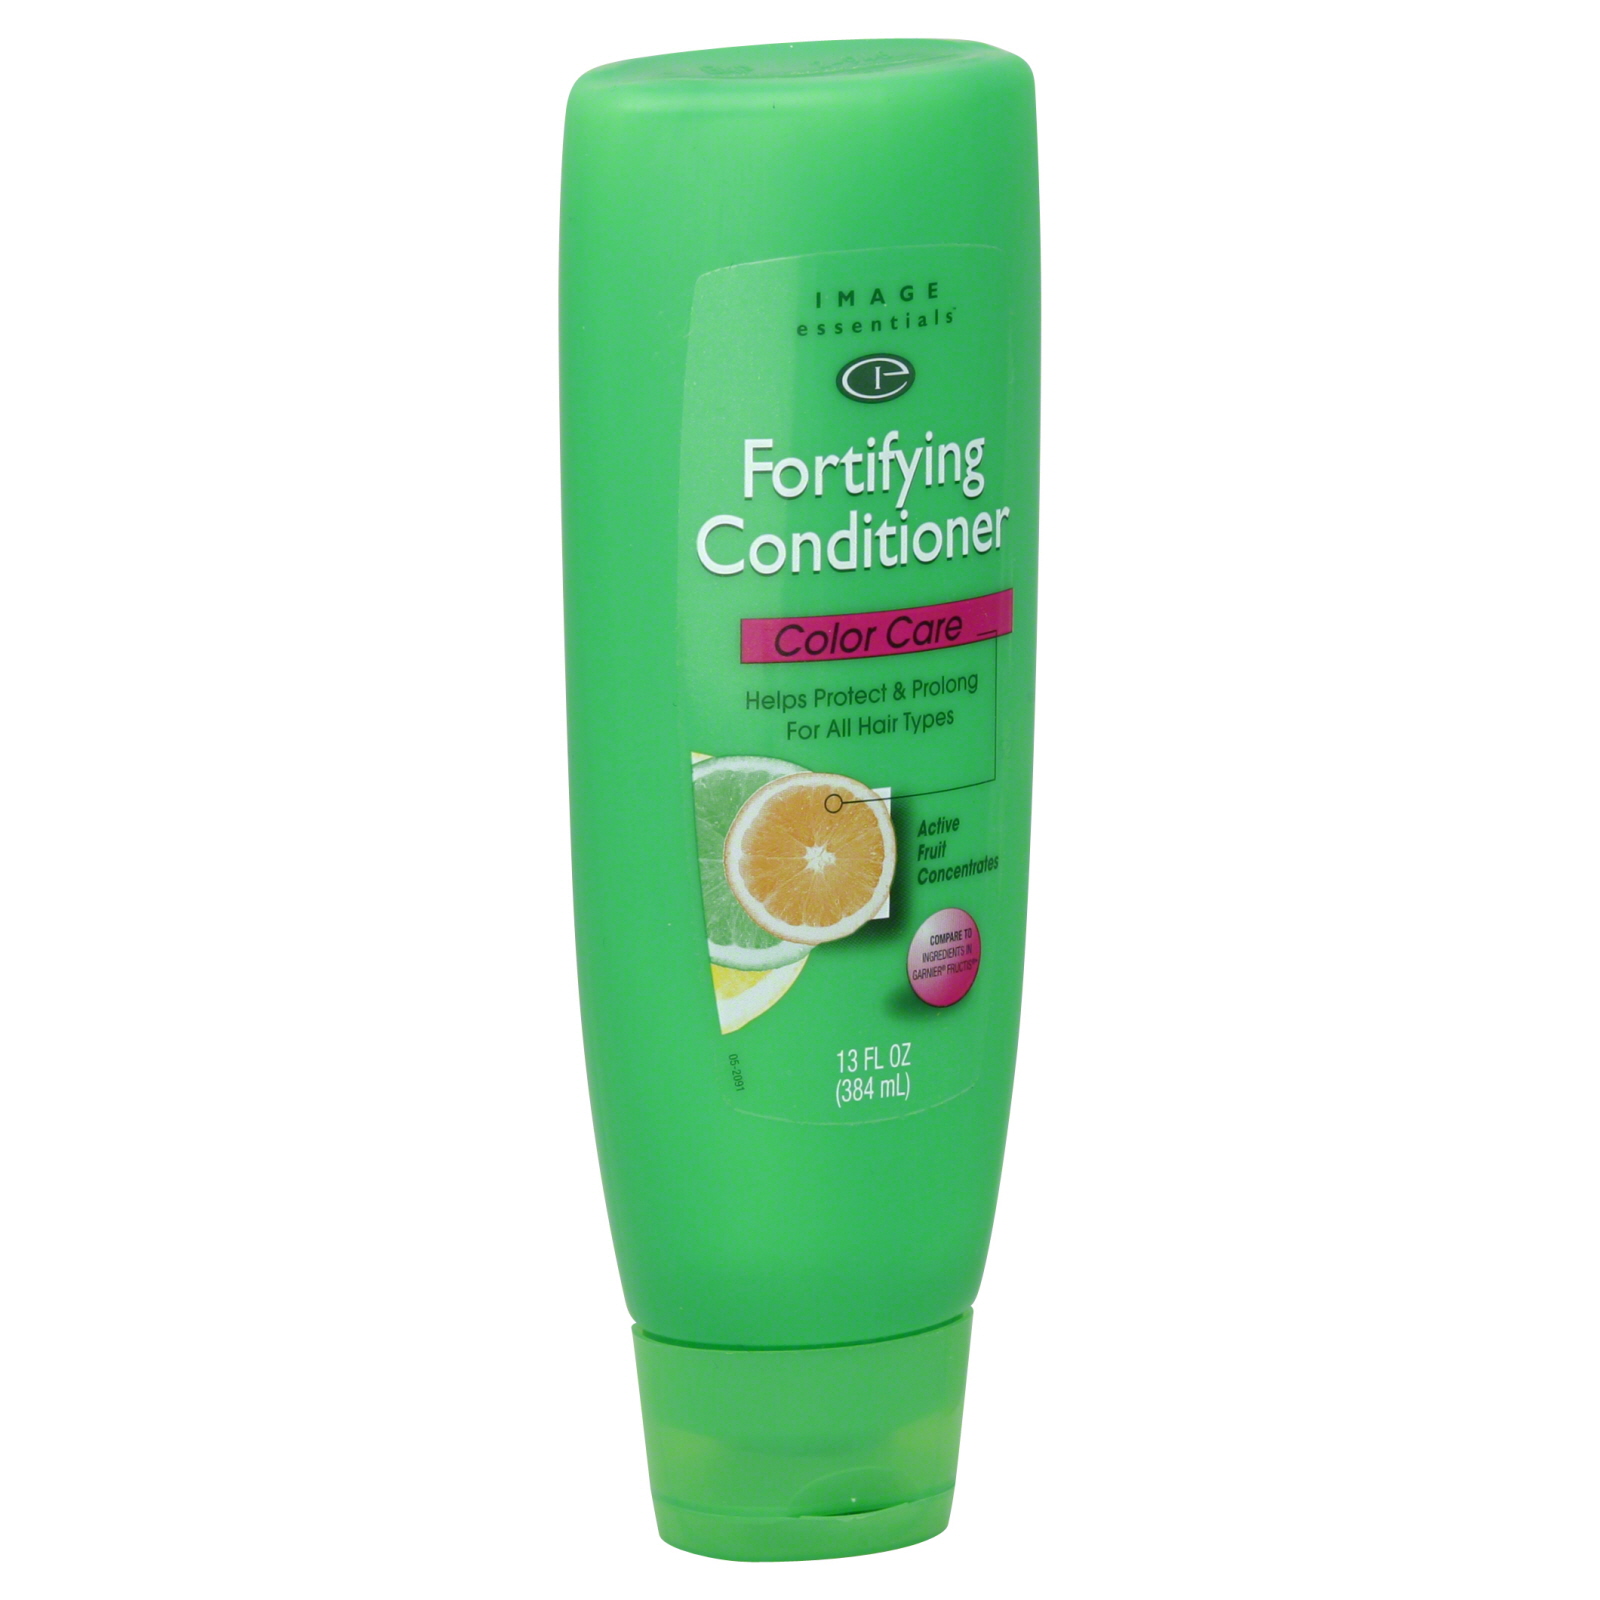 Image Essentials Conditioner, Fortifying, Color Care, 13 oz.